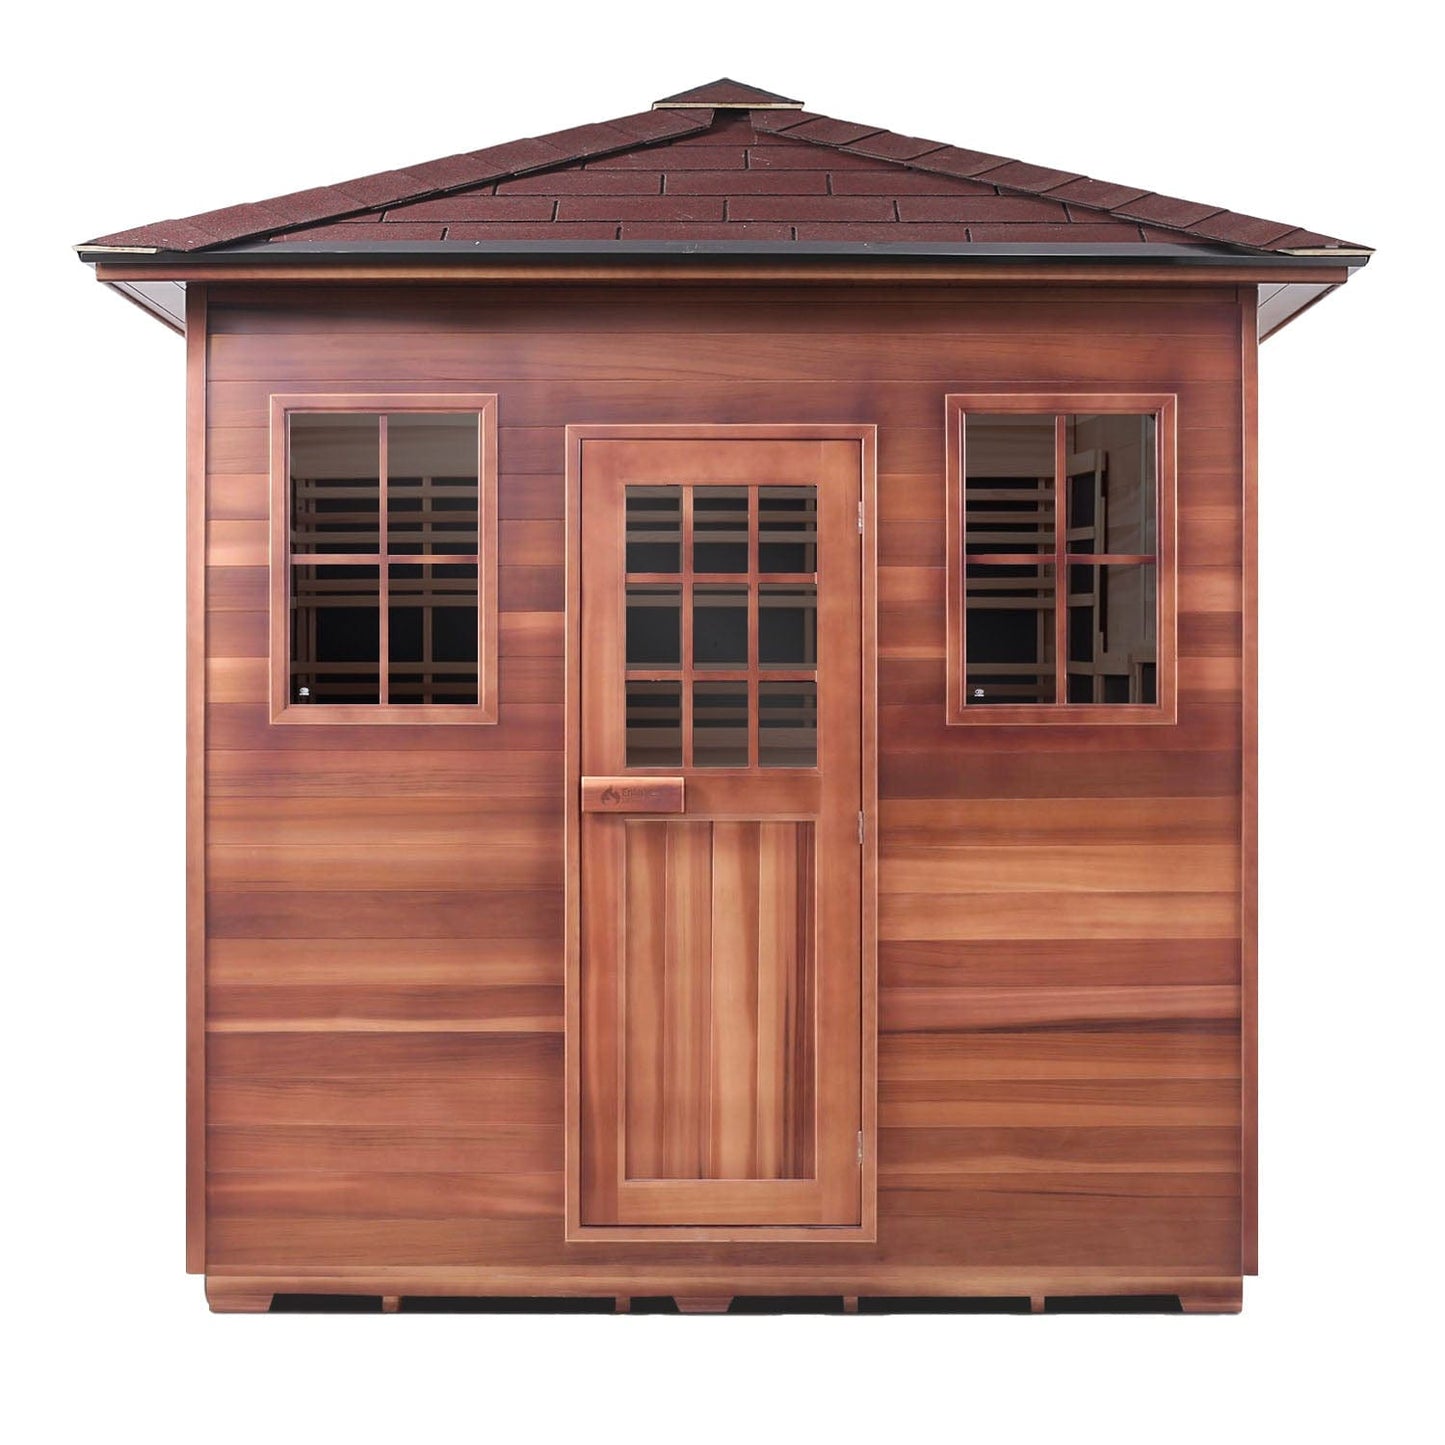 Enlighten H-16677 Peak Roof Sapphire Outdoor 8-Person Hybrid Sauna - both Infrared and Traditional heating